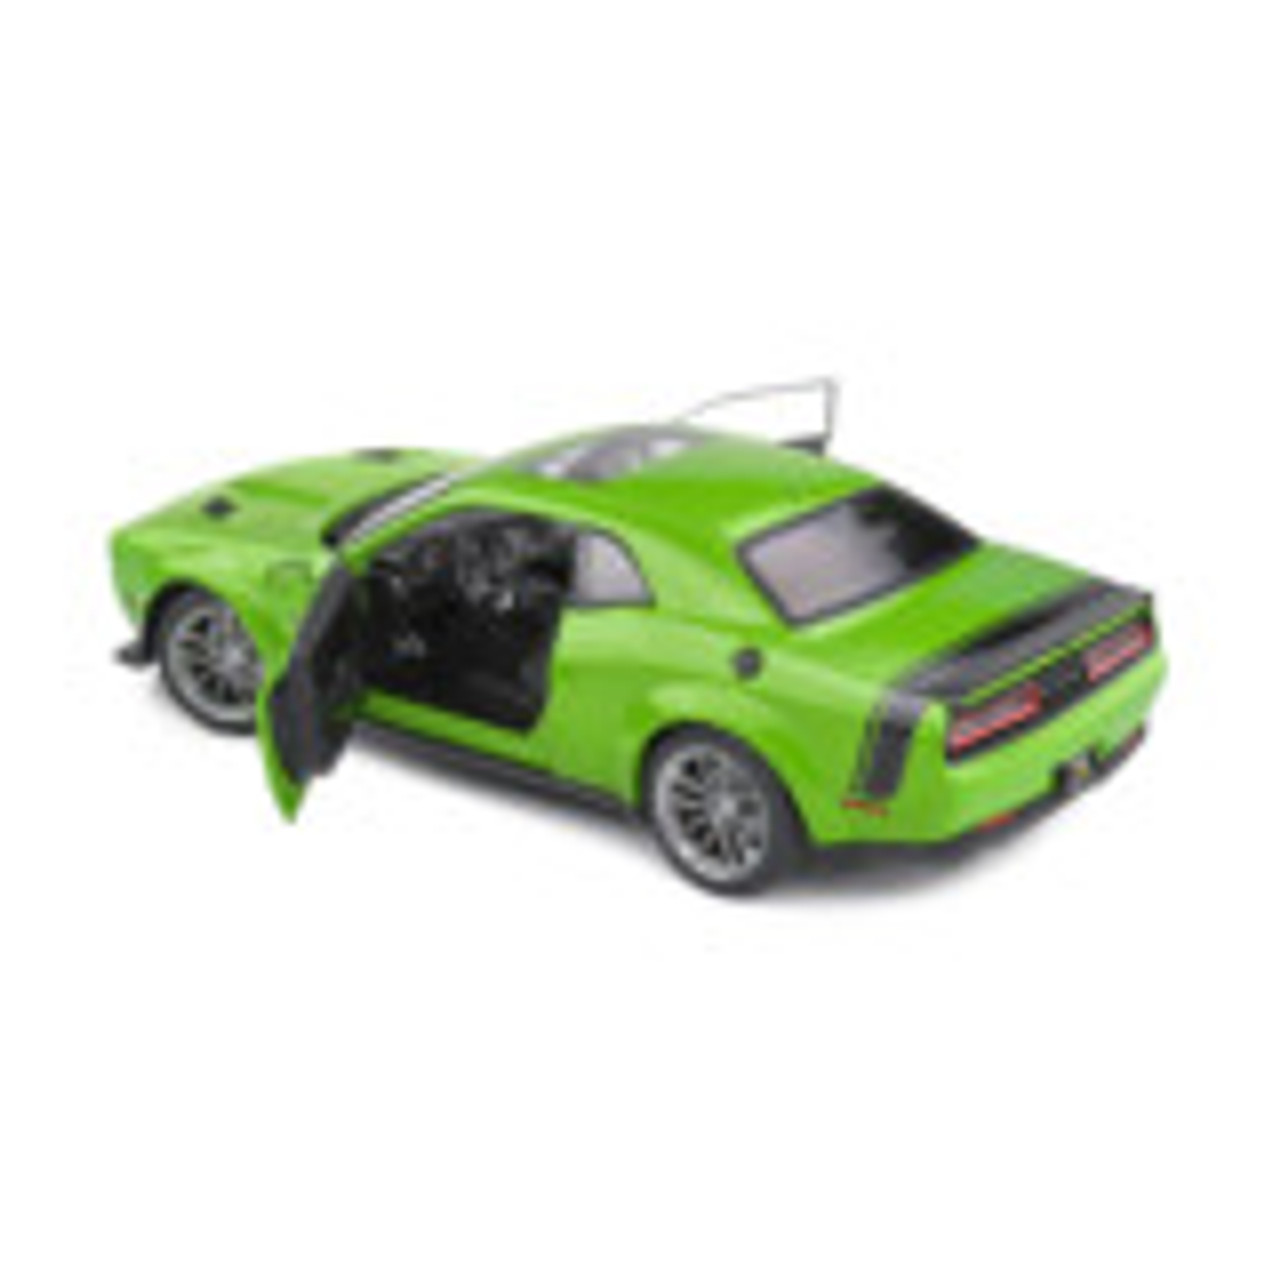  1/18 Solido 2020 Dodge Challenger R/T Scat Pack Widebody (Green) Diecast Car Model